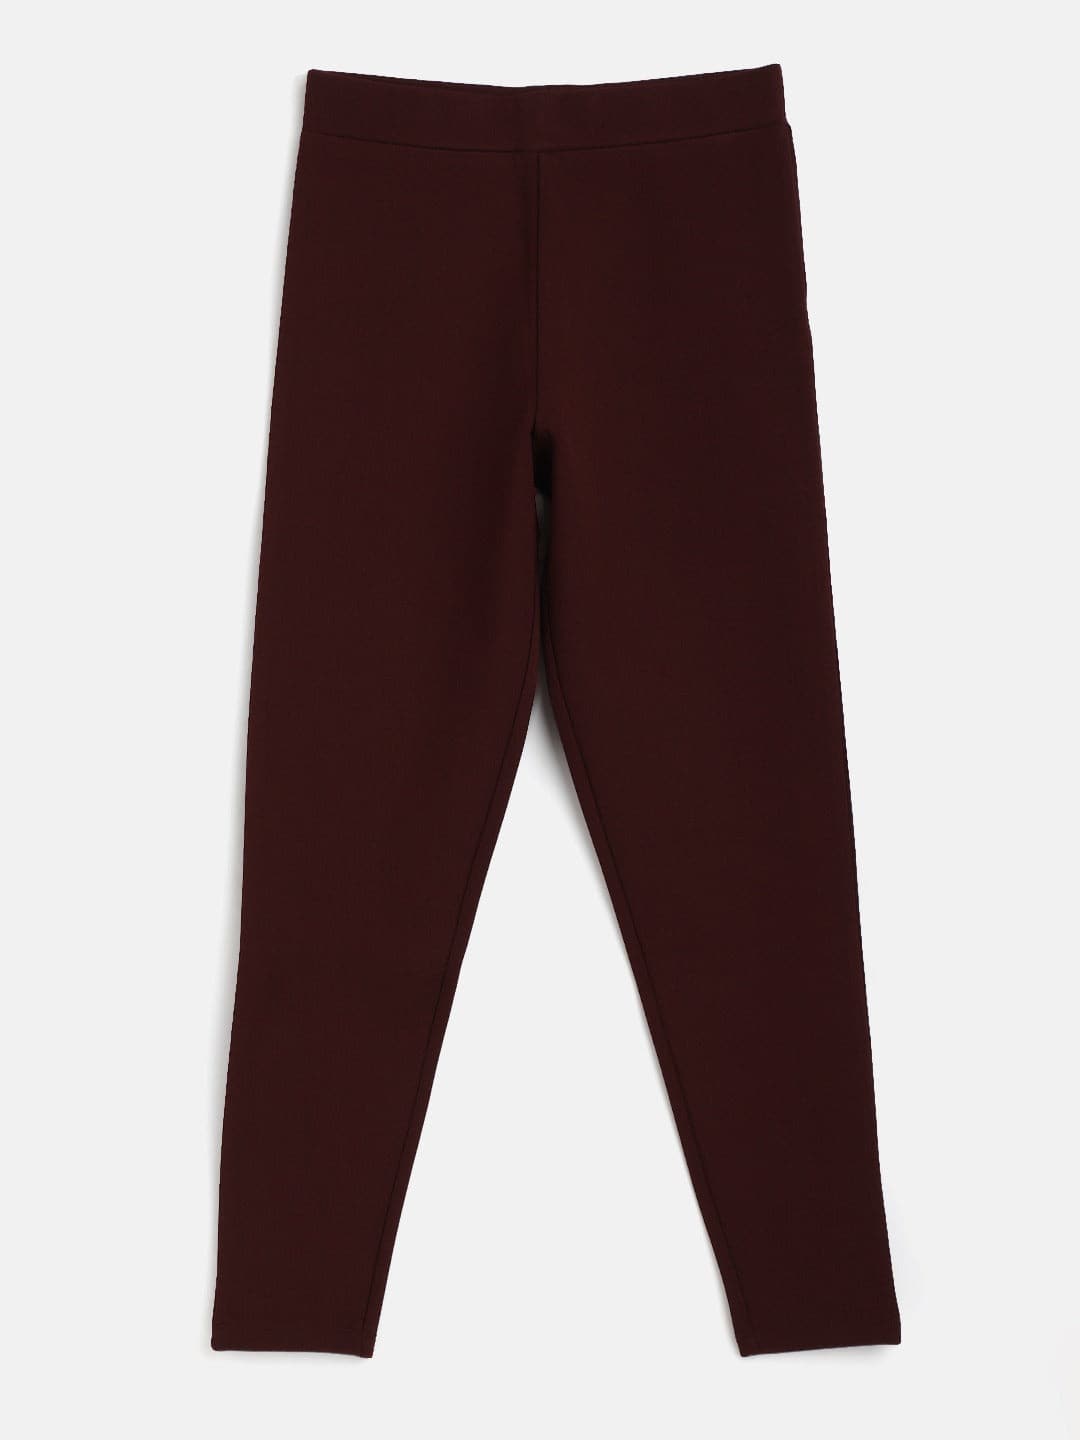 Buy Maroon Jeans & Jeggings for Girls by Go Colors Online